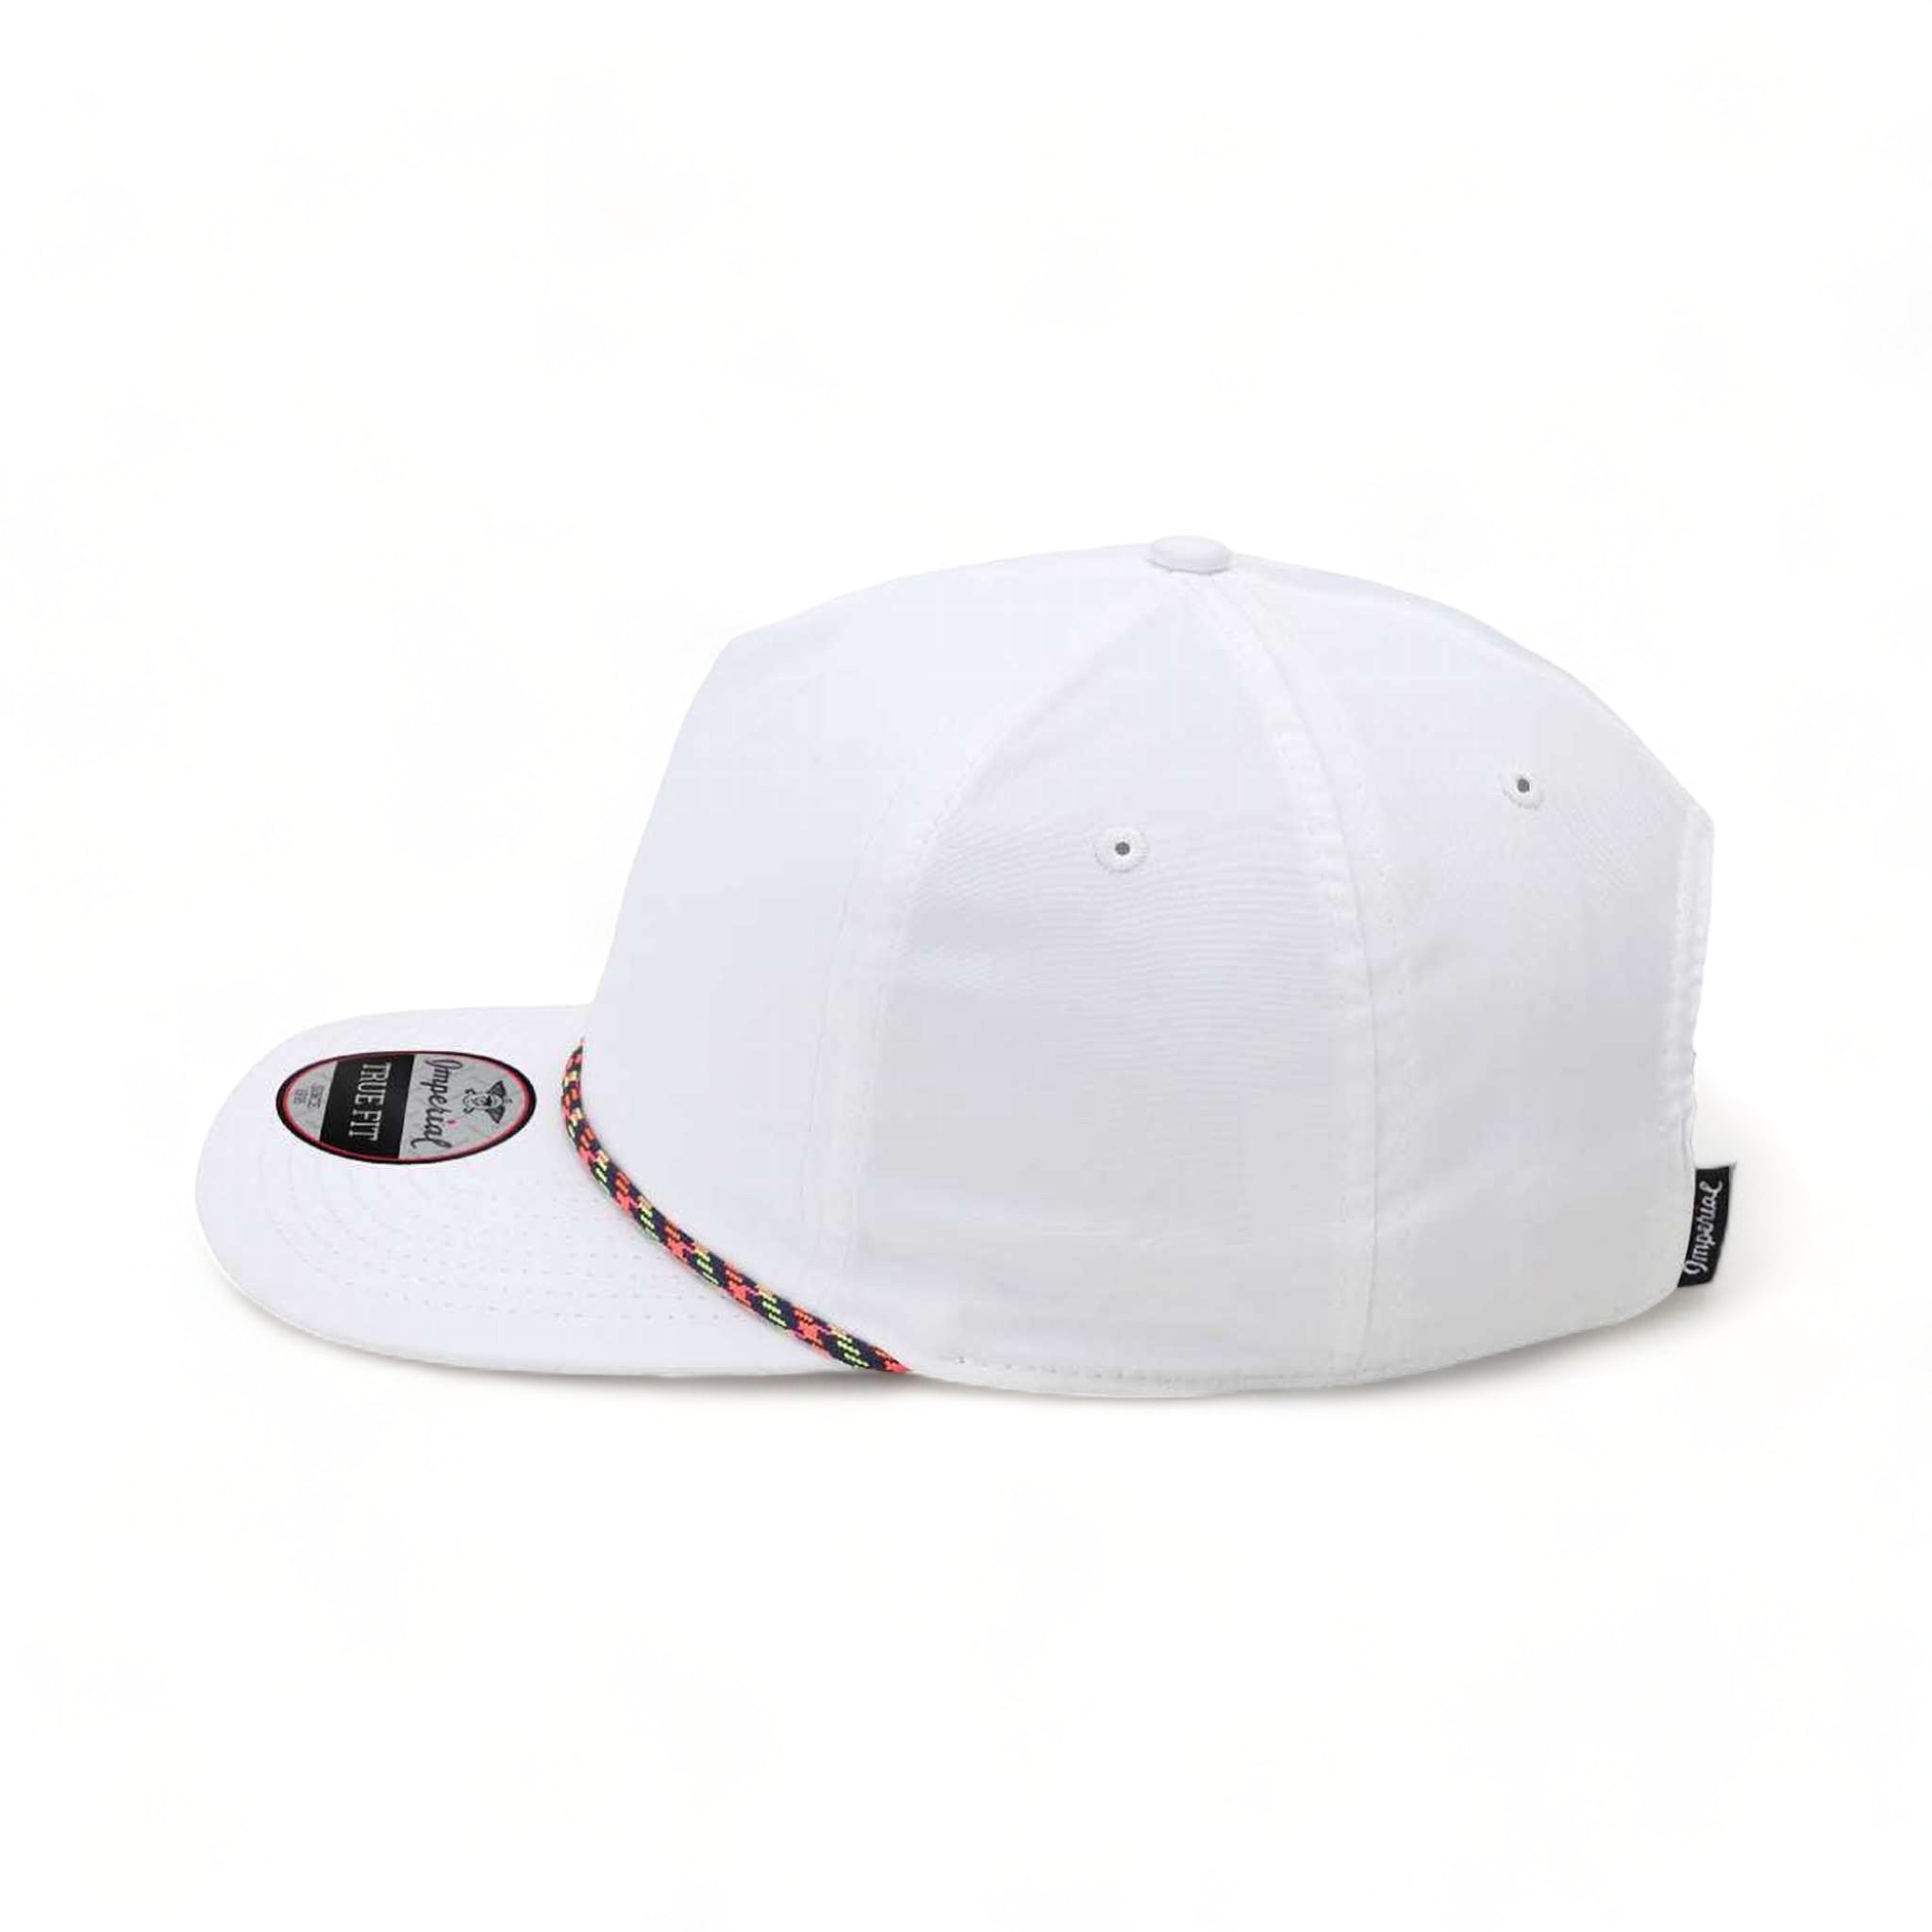 Side view of Imperial 5054 custom hat in white, navy and neon